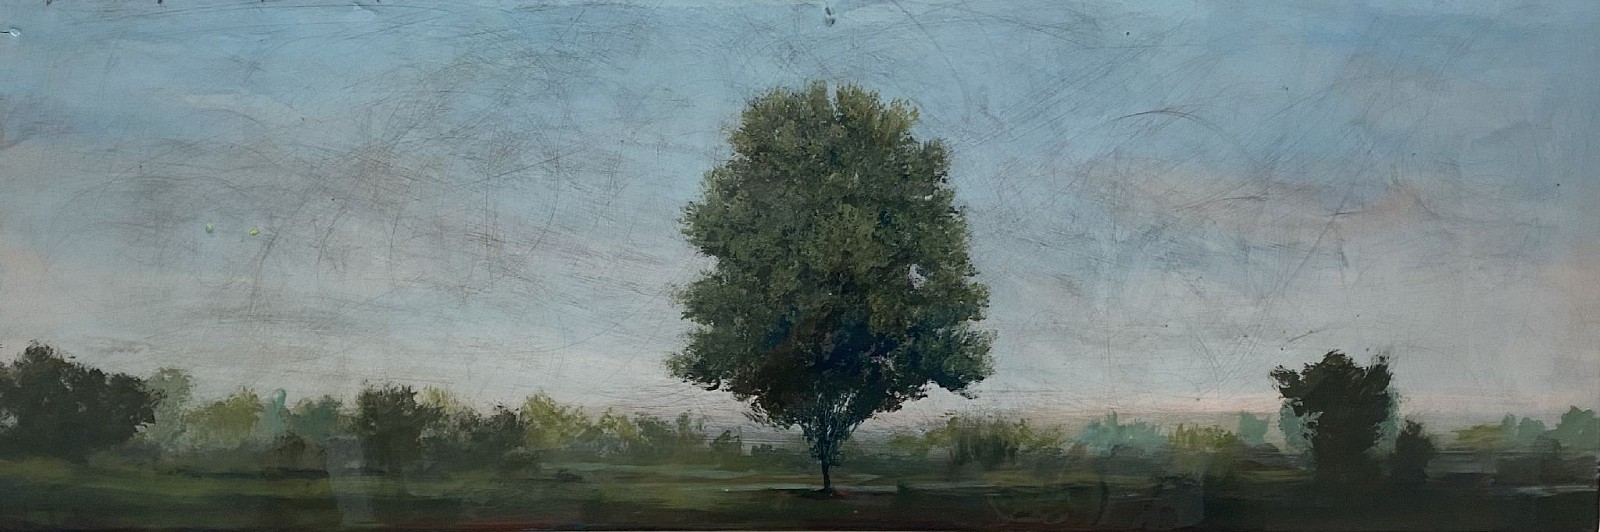 Peter Hoffer, Canterbury Maple
Acrylic and Epoxy on Board, 16 x 48 in. (40.6 x 121.9 cm)
SOLD
07745
&bull;